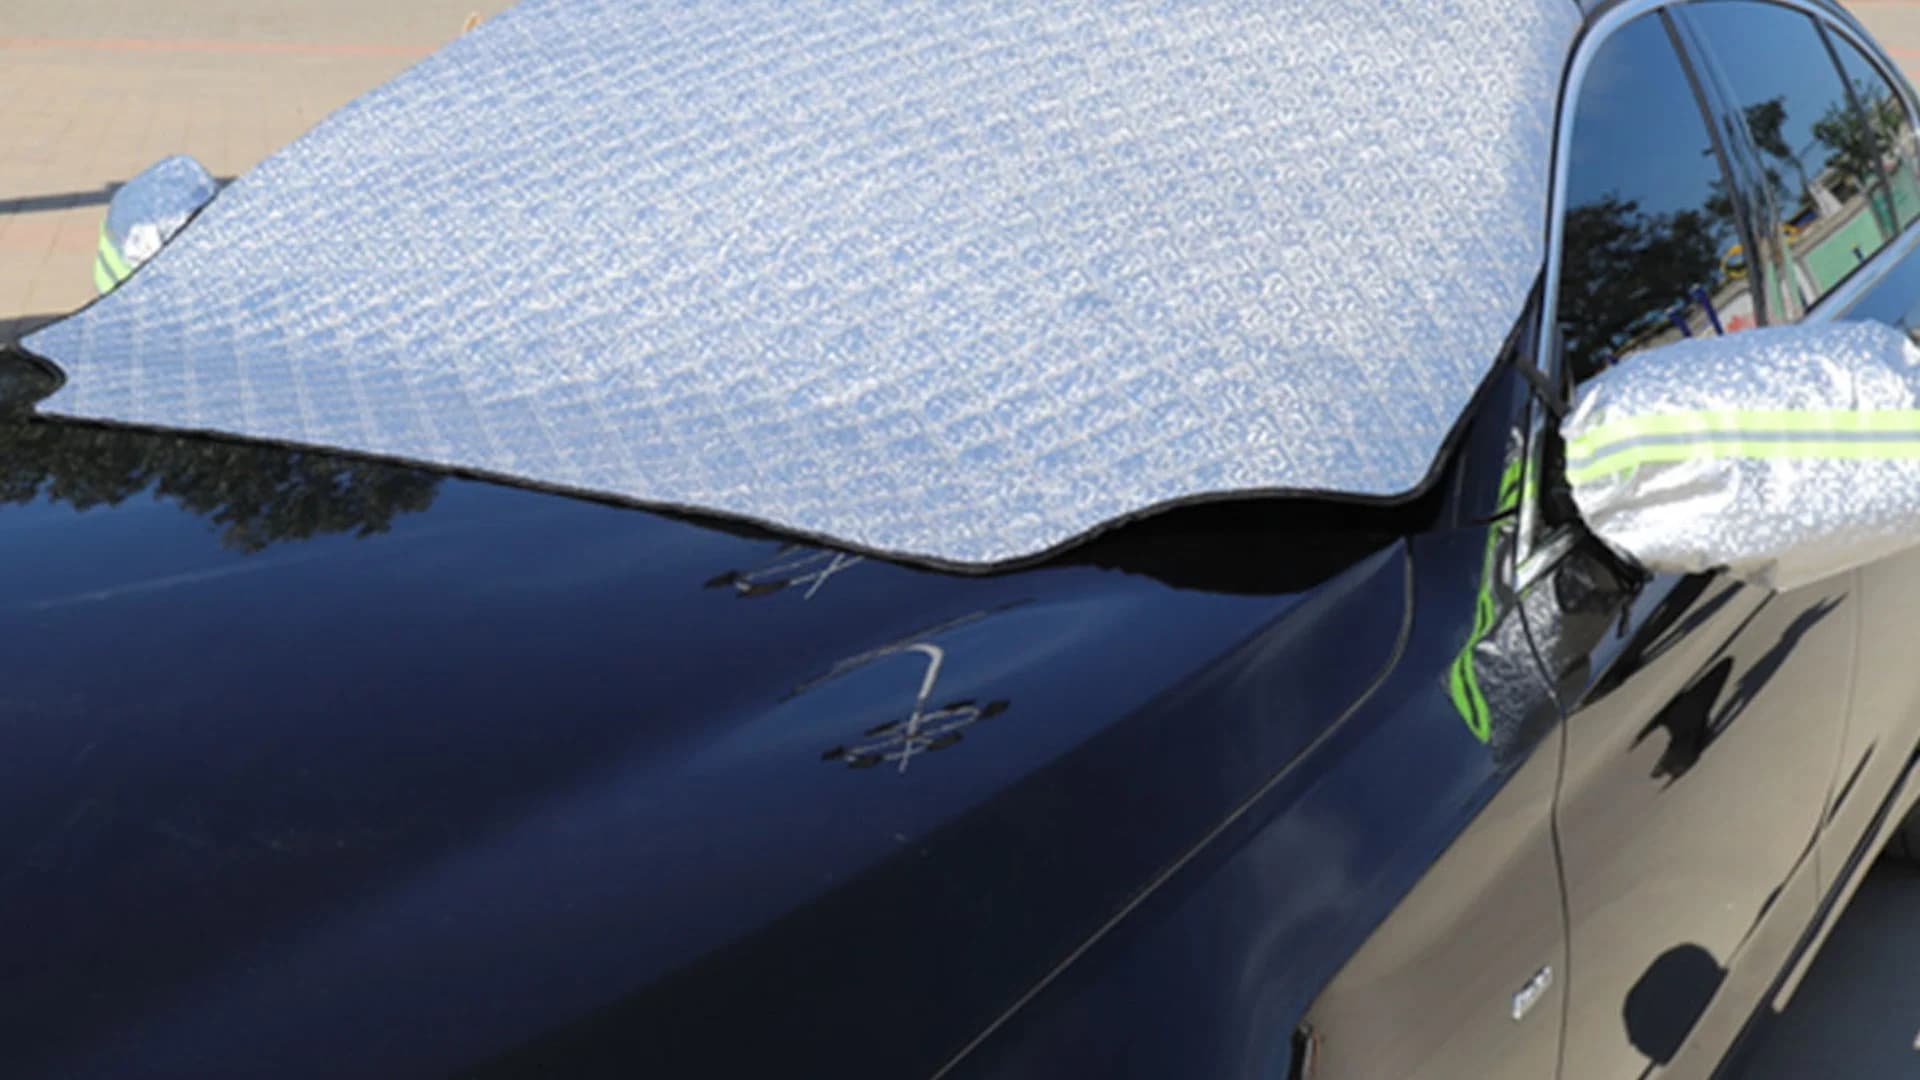 Save nearly $50 on this winter windshield cover